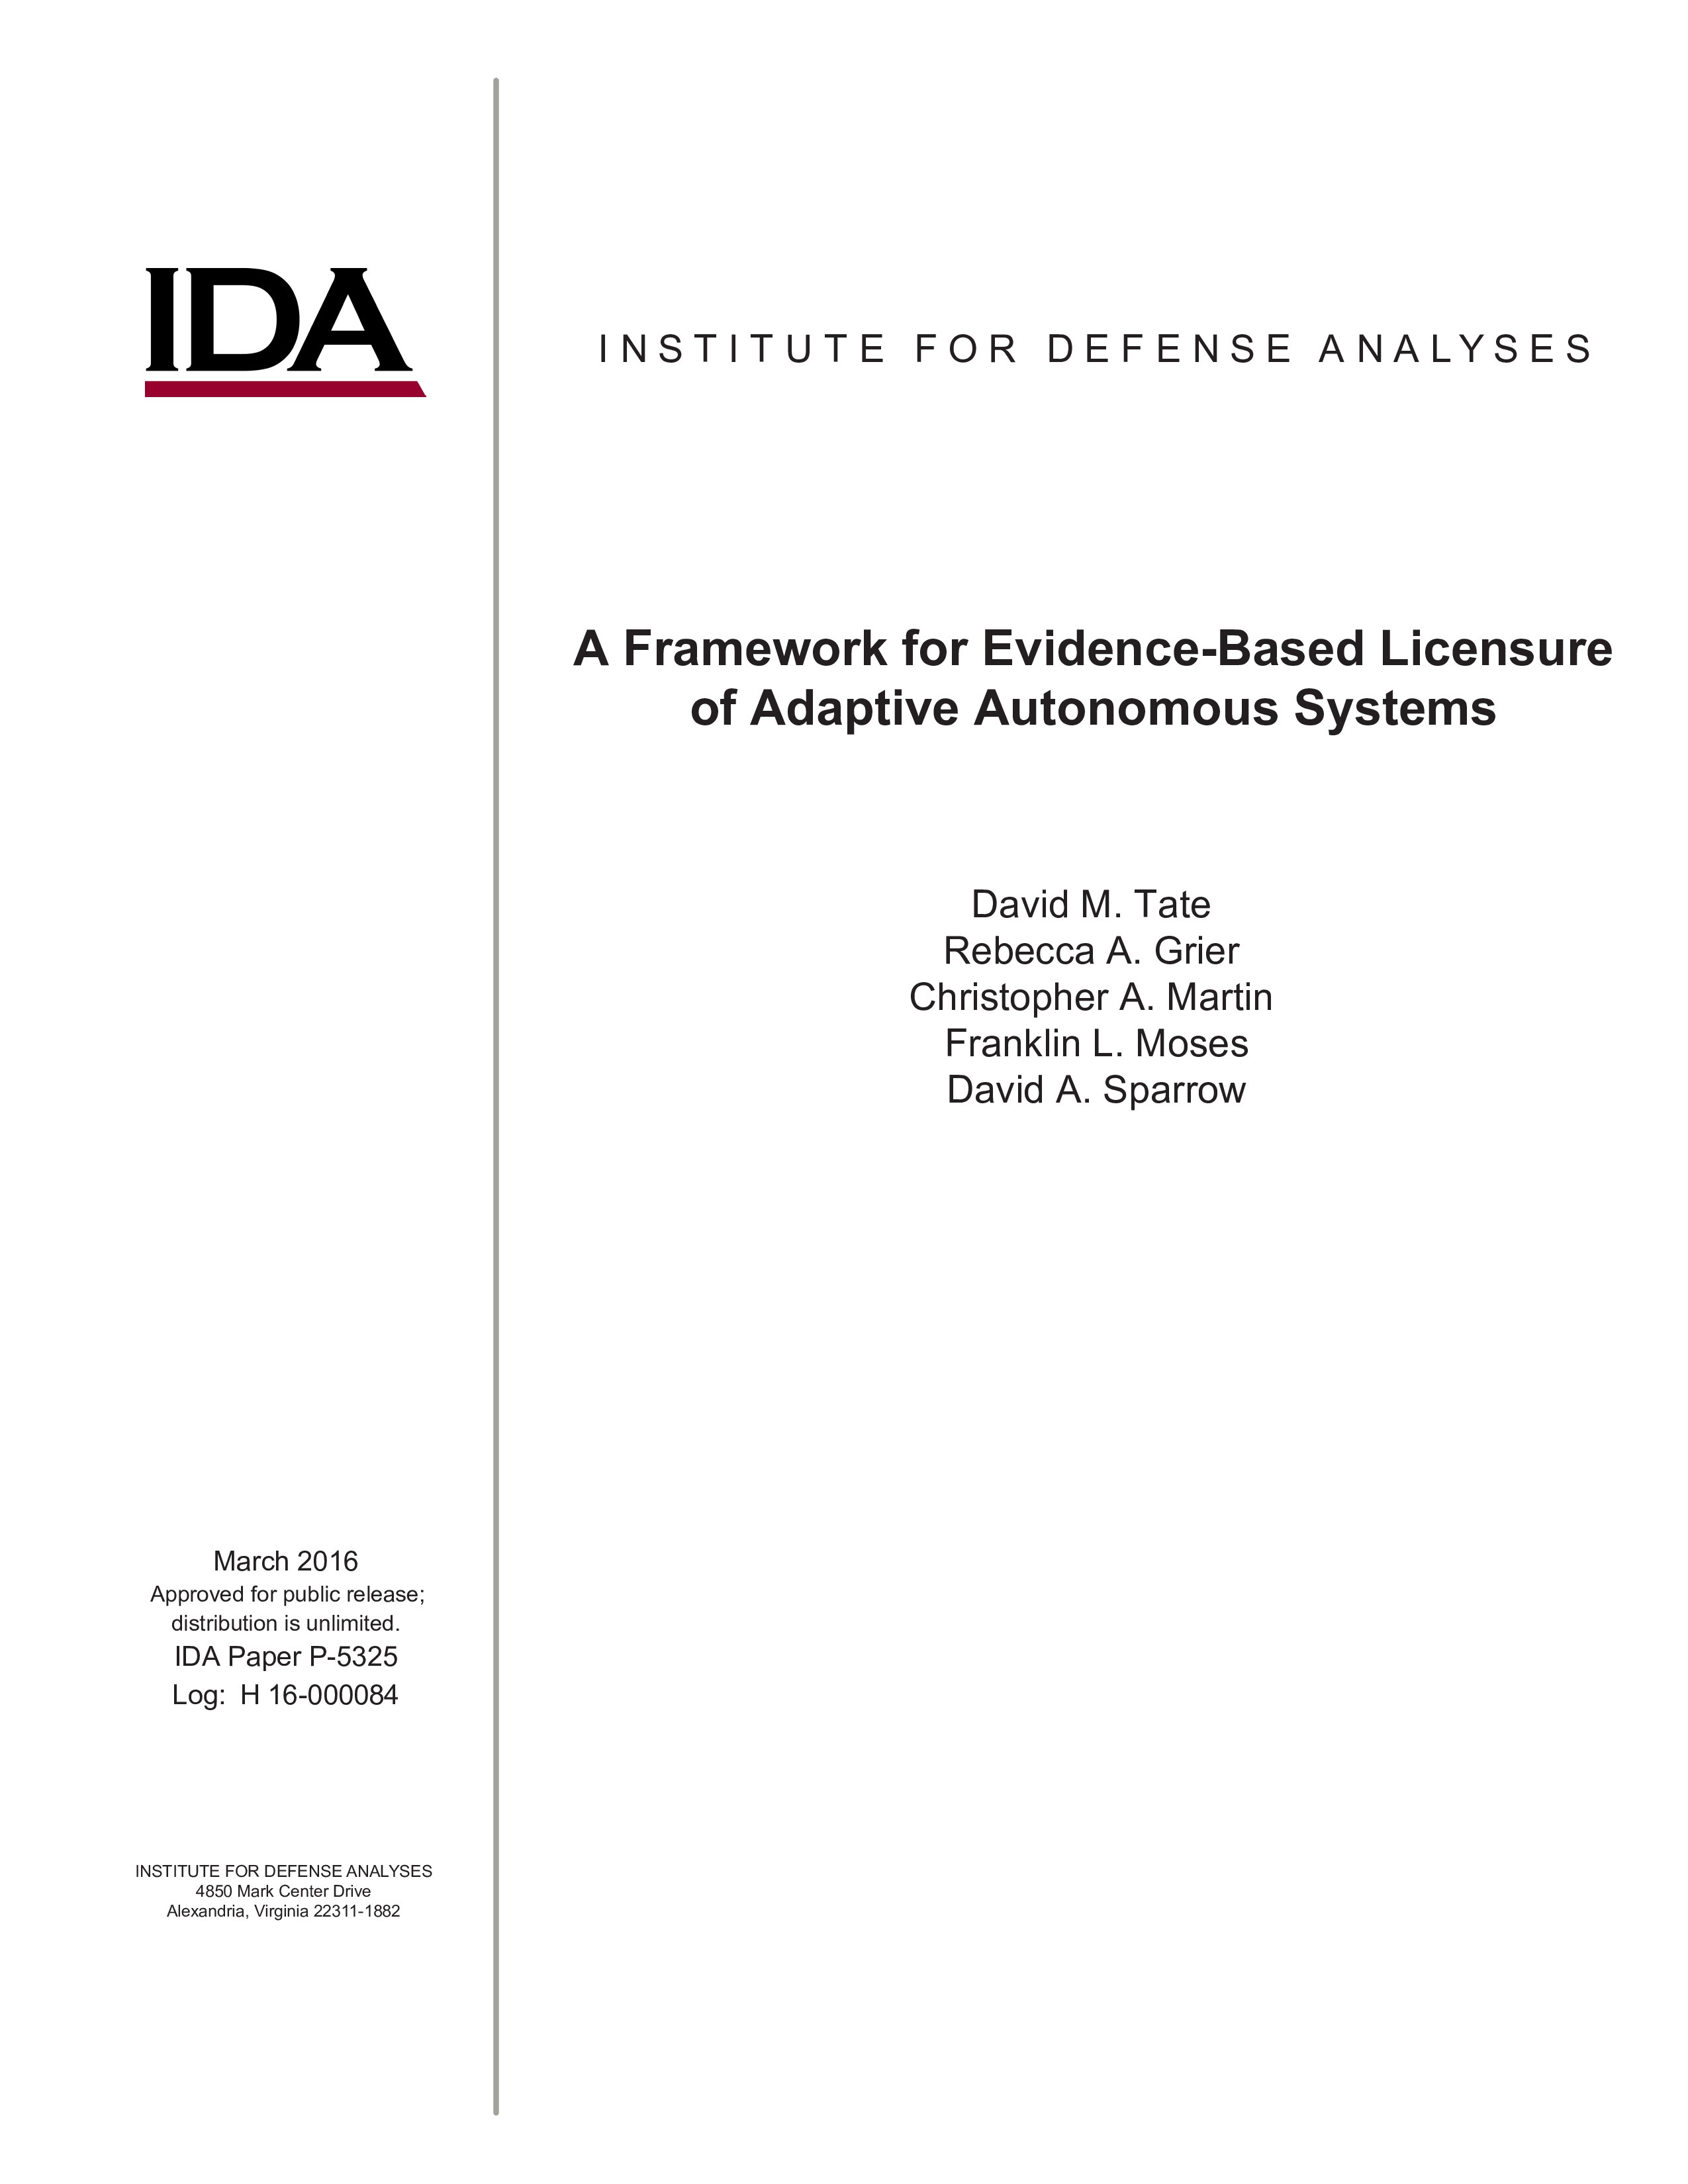 A Framework for Evidence-Based Licensure of Adaptive Autonomous Systems